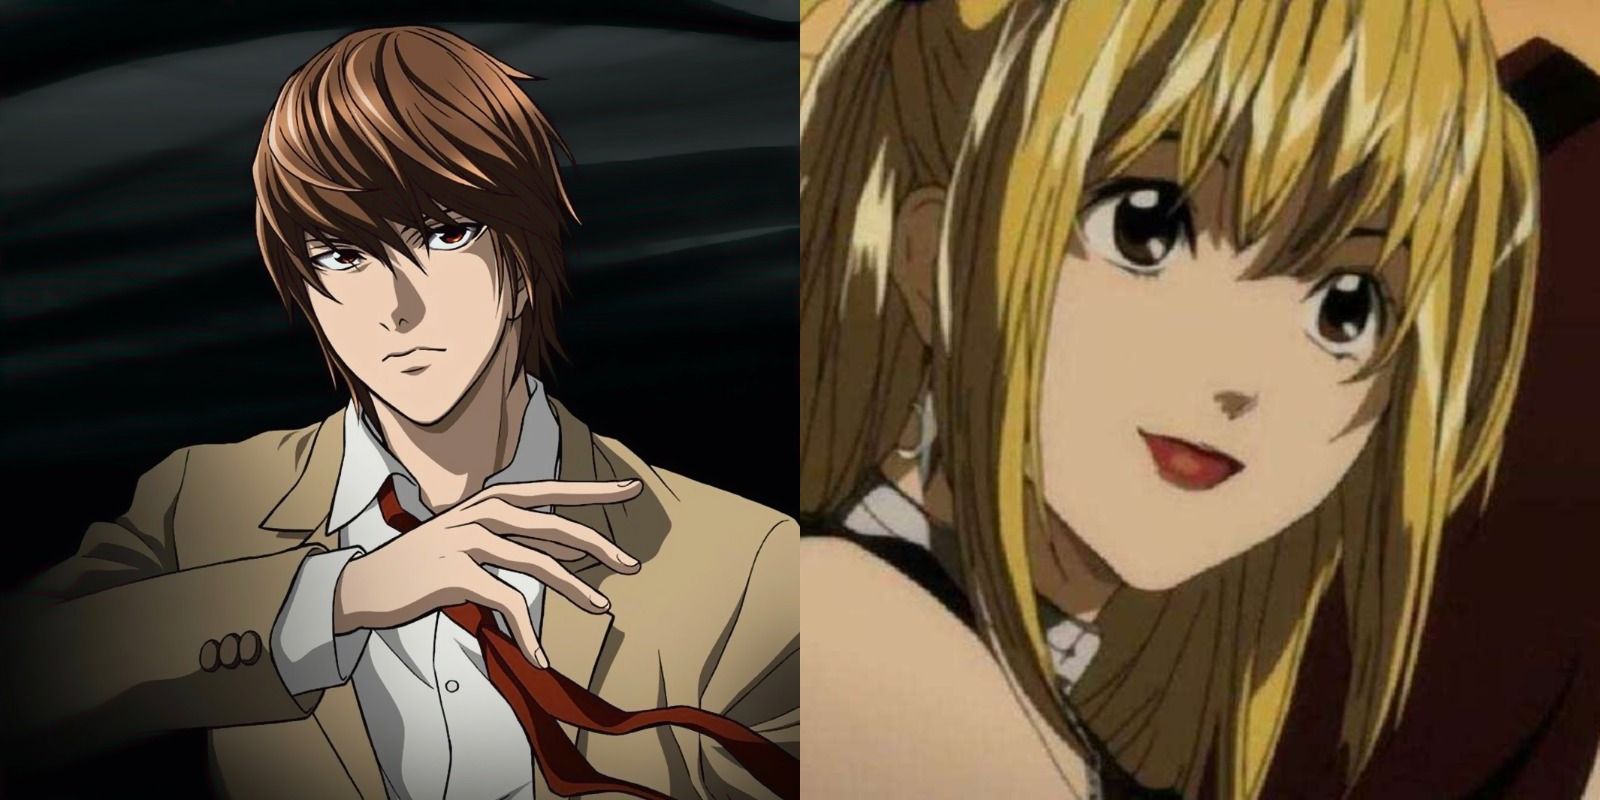 Light Yagami and Misa Amane from Death Note, in a split image.